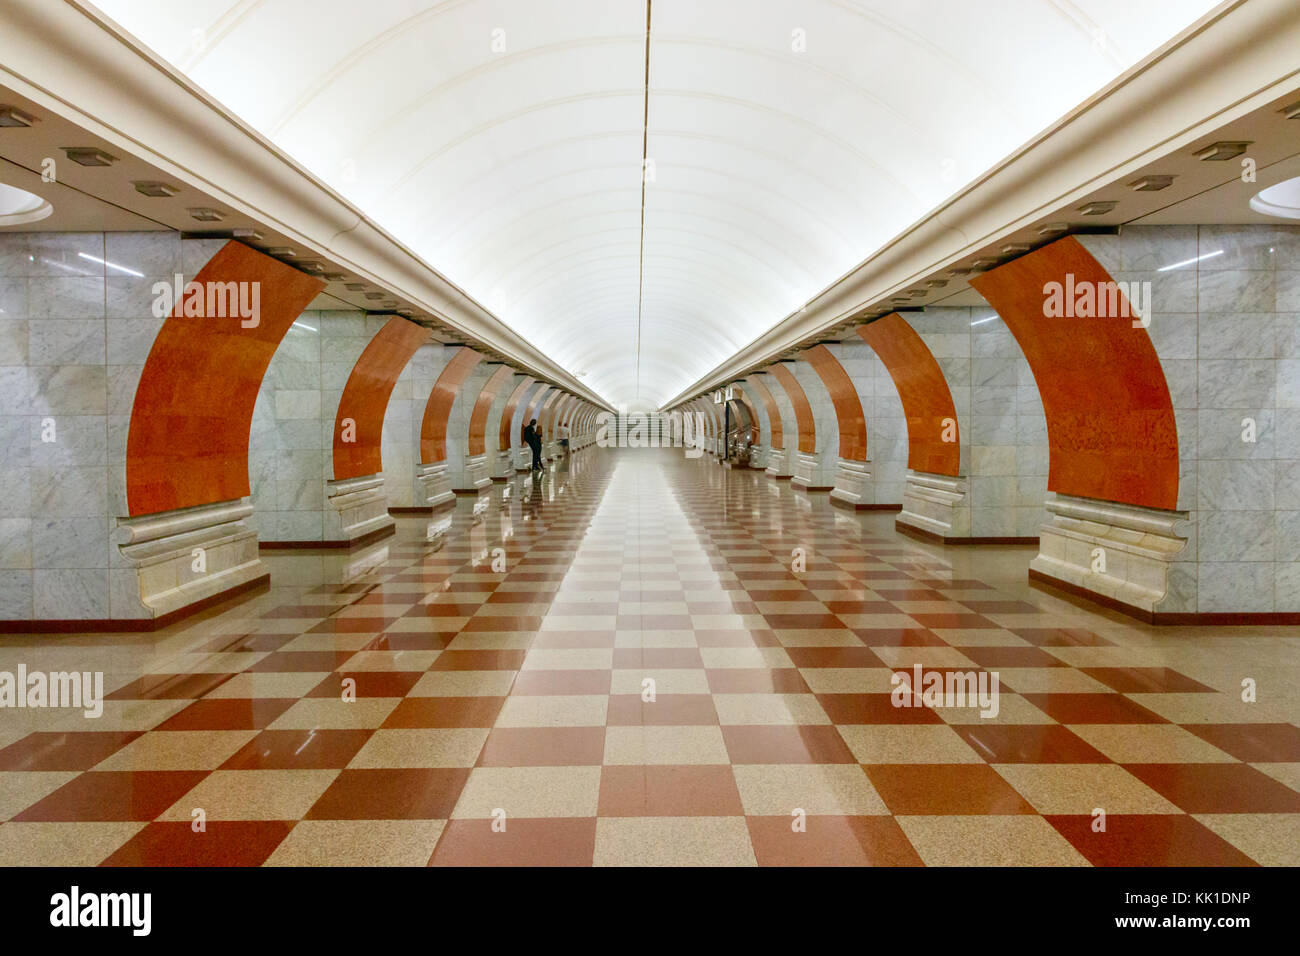 Platform of the Park Pobedy metro station, Moscow, Russia. The Moscow Metro is one of the largest rapid transit systems in the world. Stock Photo